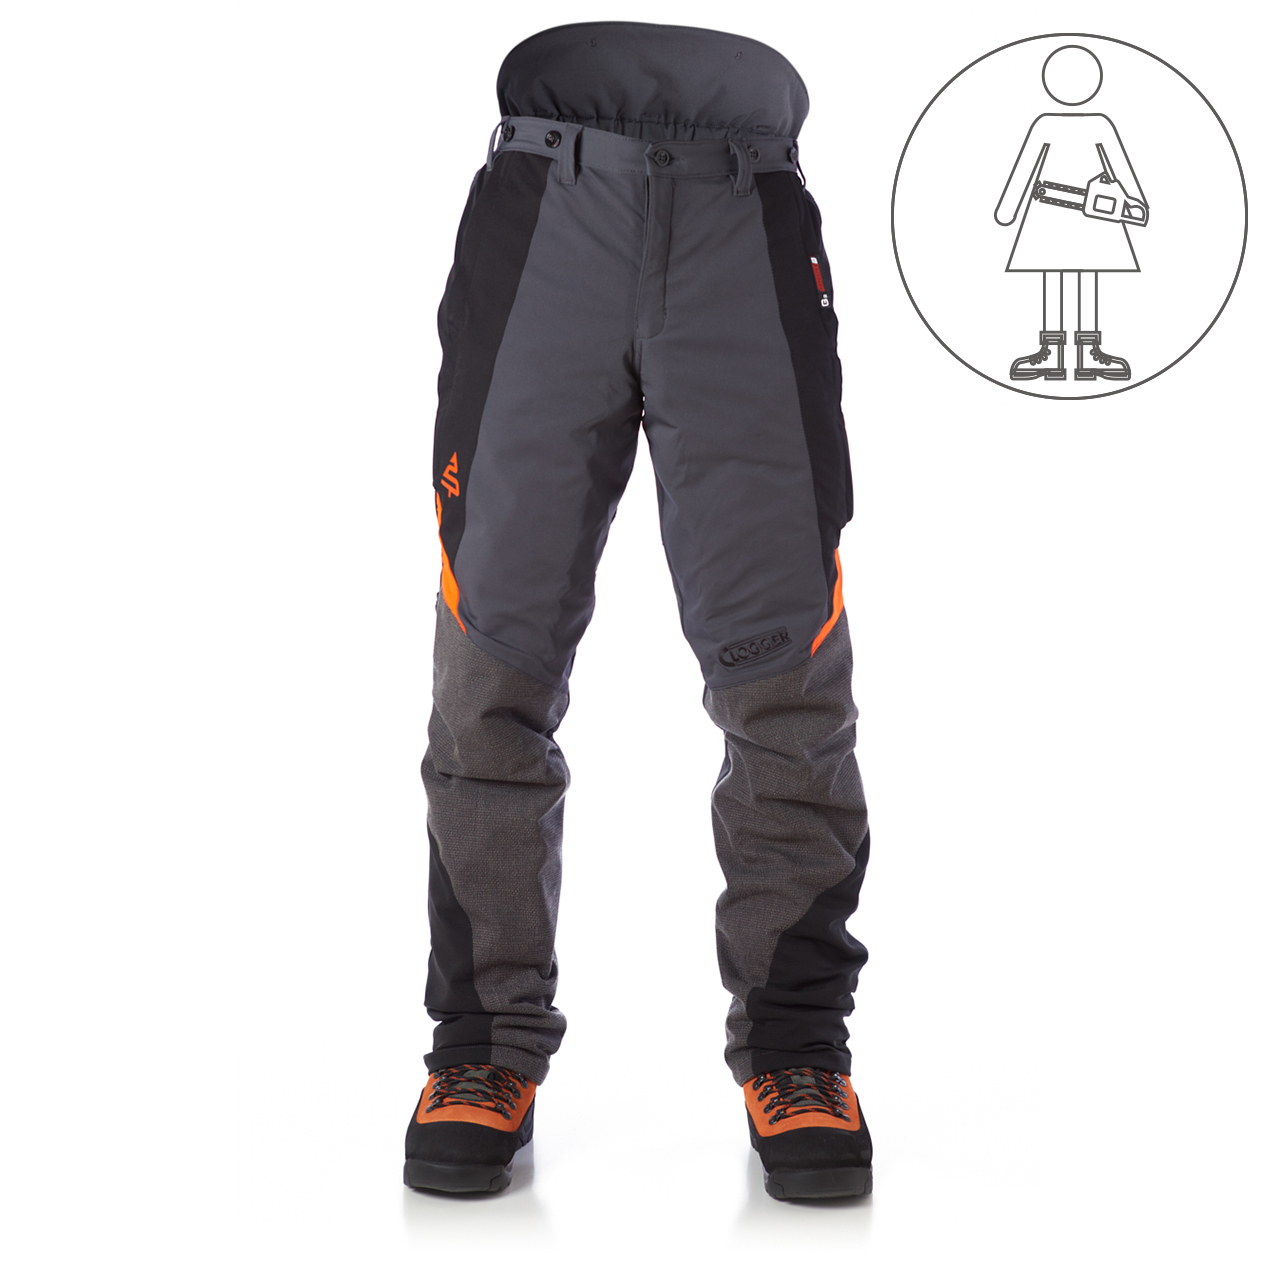 Clogger Ascend All Season Women's Chainsaw Pants